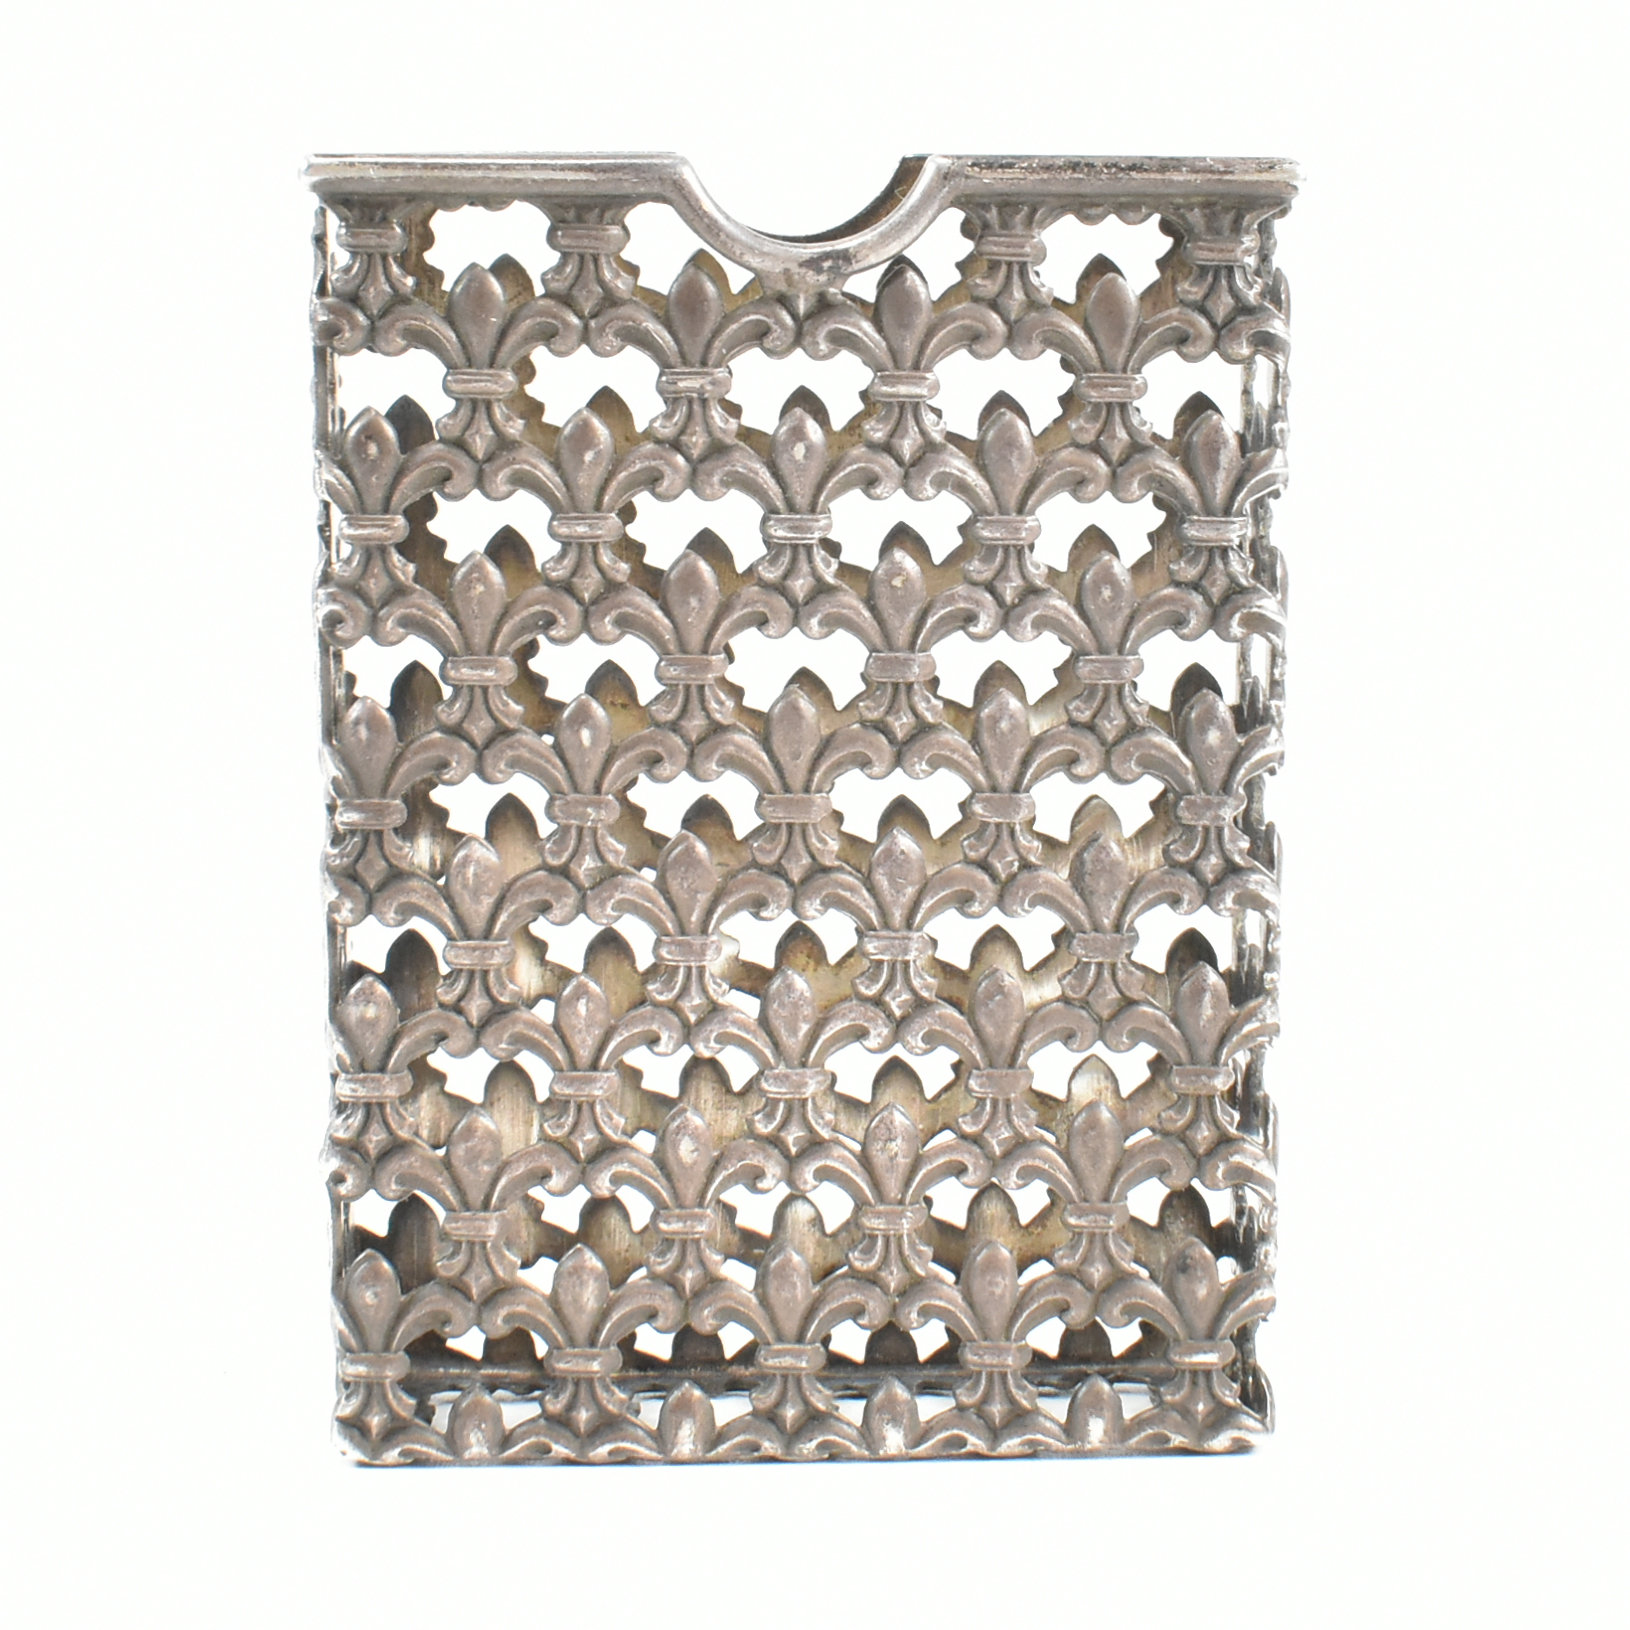 STERLING SILVER PLAYING CARD CASE - Image 2 of 8